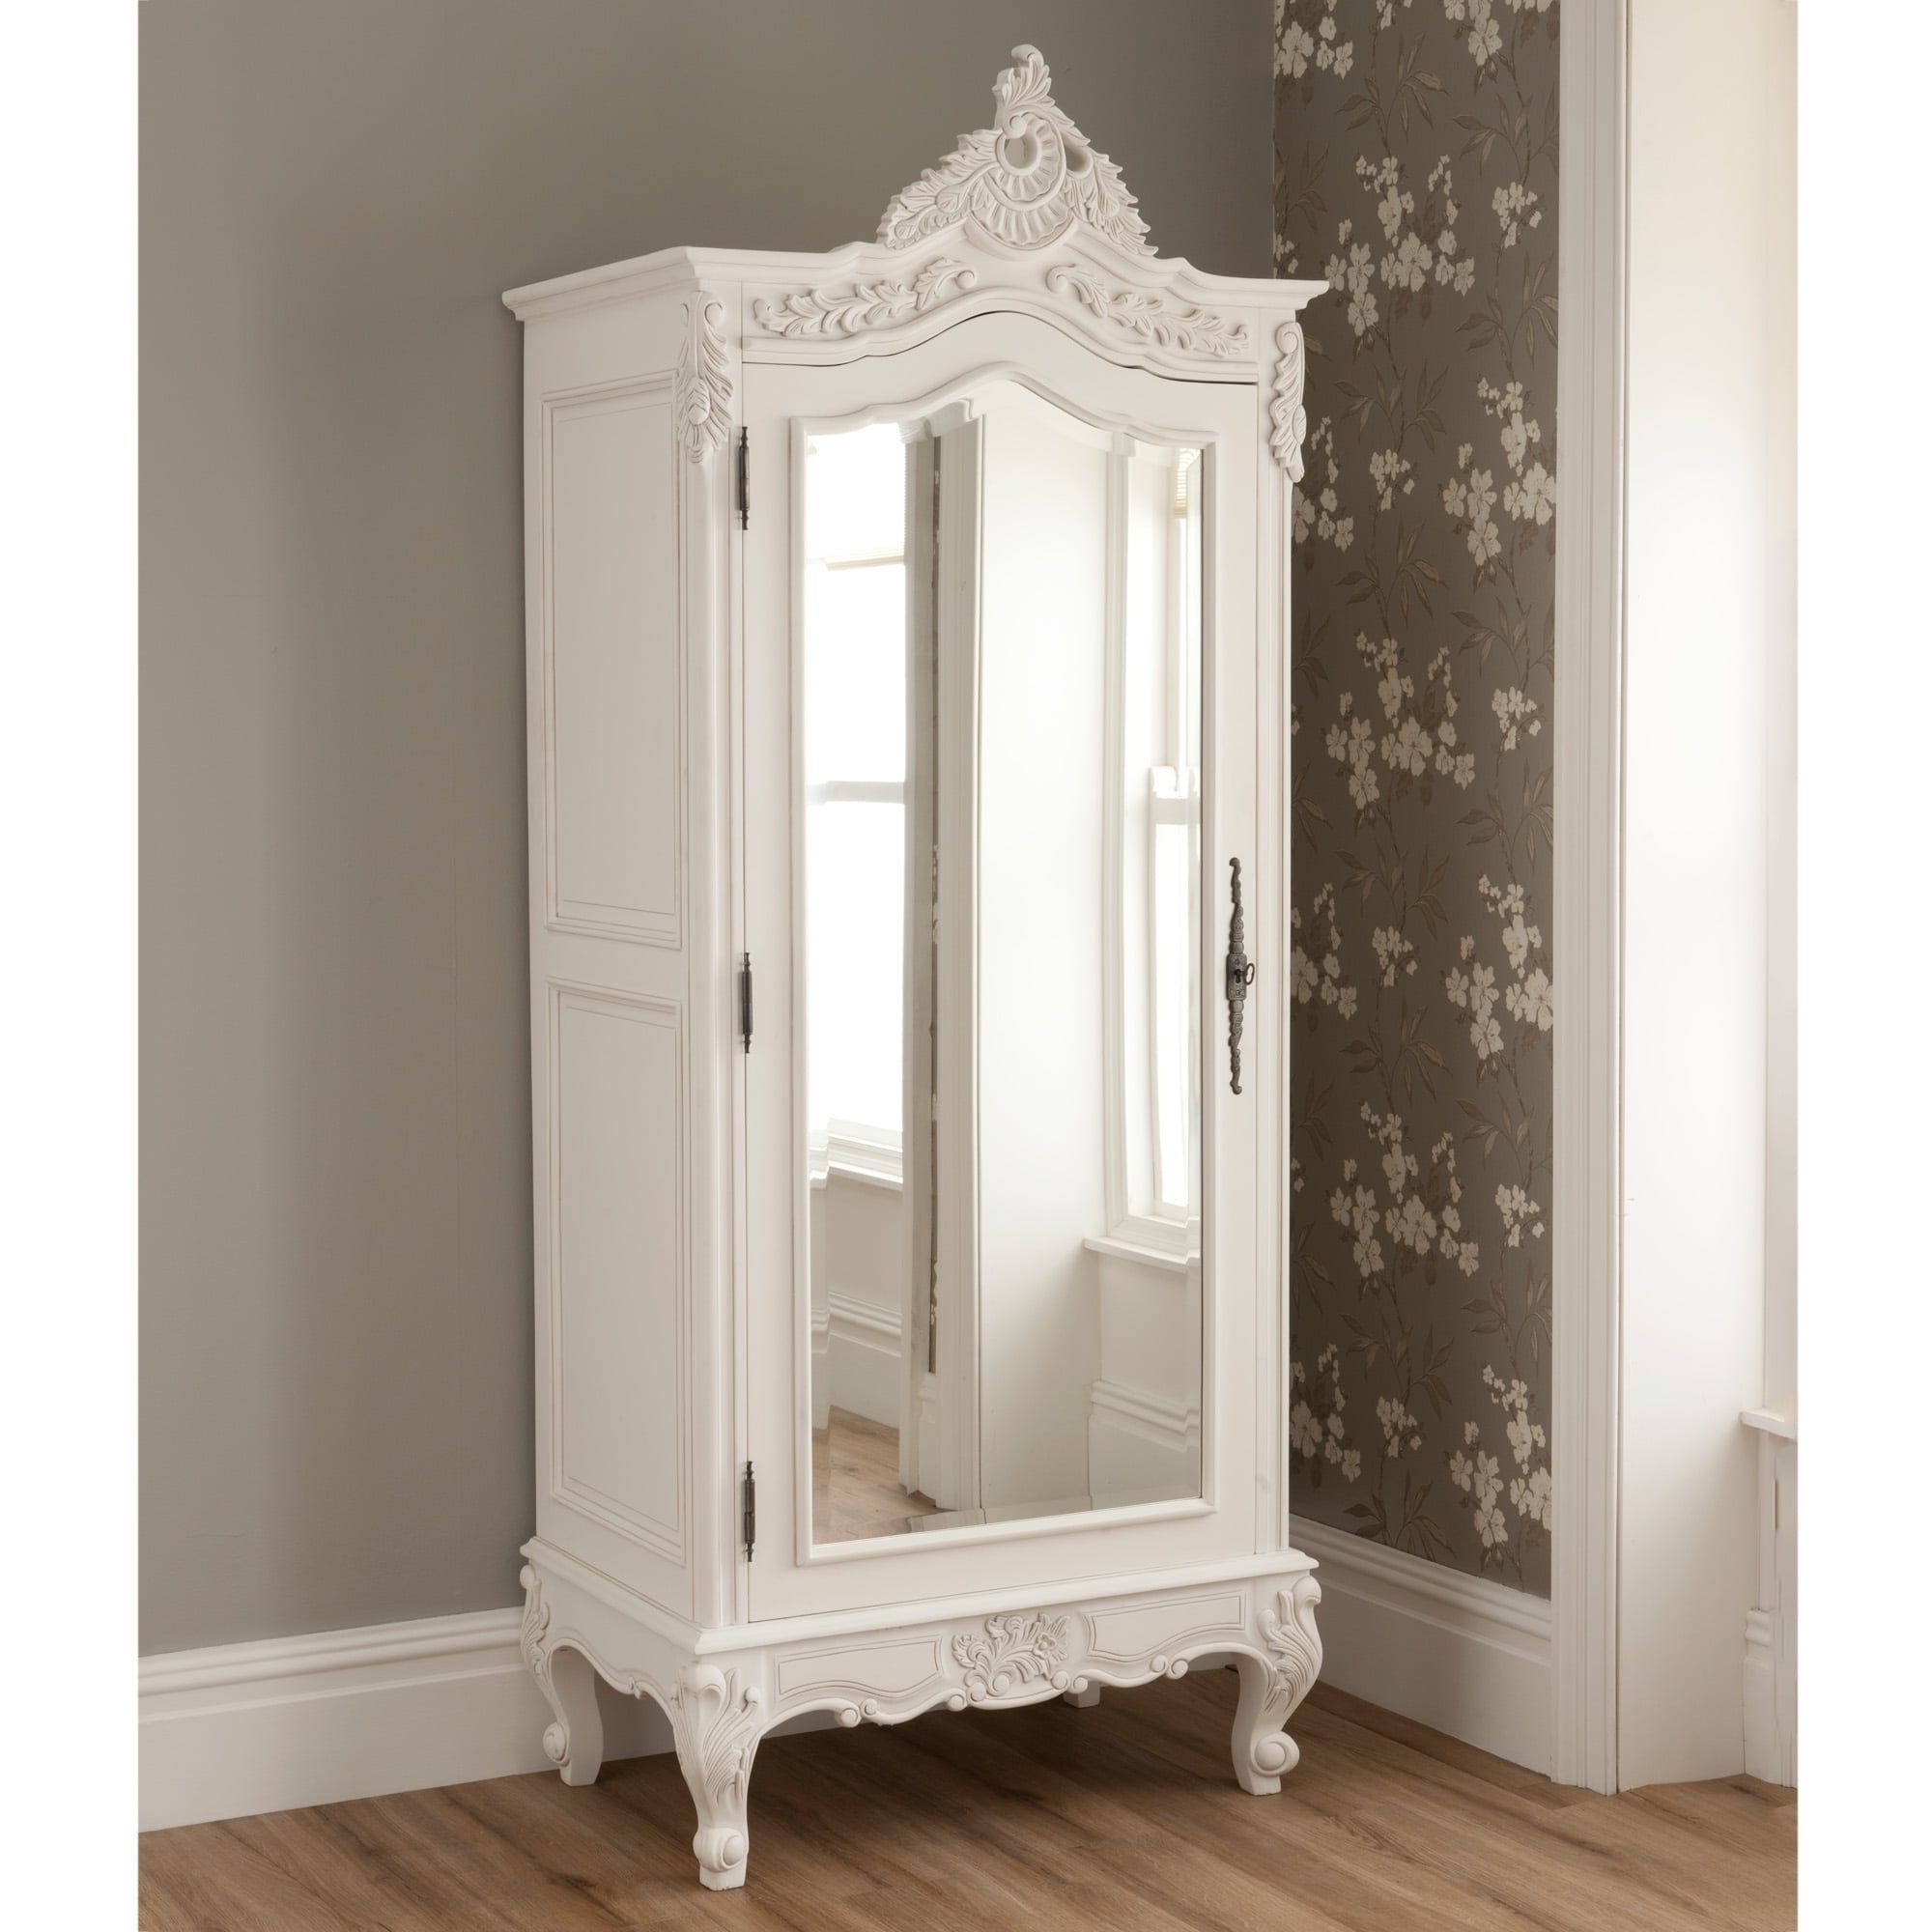 Fashionable Single French Wardrobes In La Rochelle Mirrored Antique French 1 Door Wardrobe (View 1 of 15)